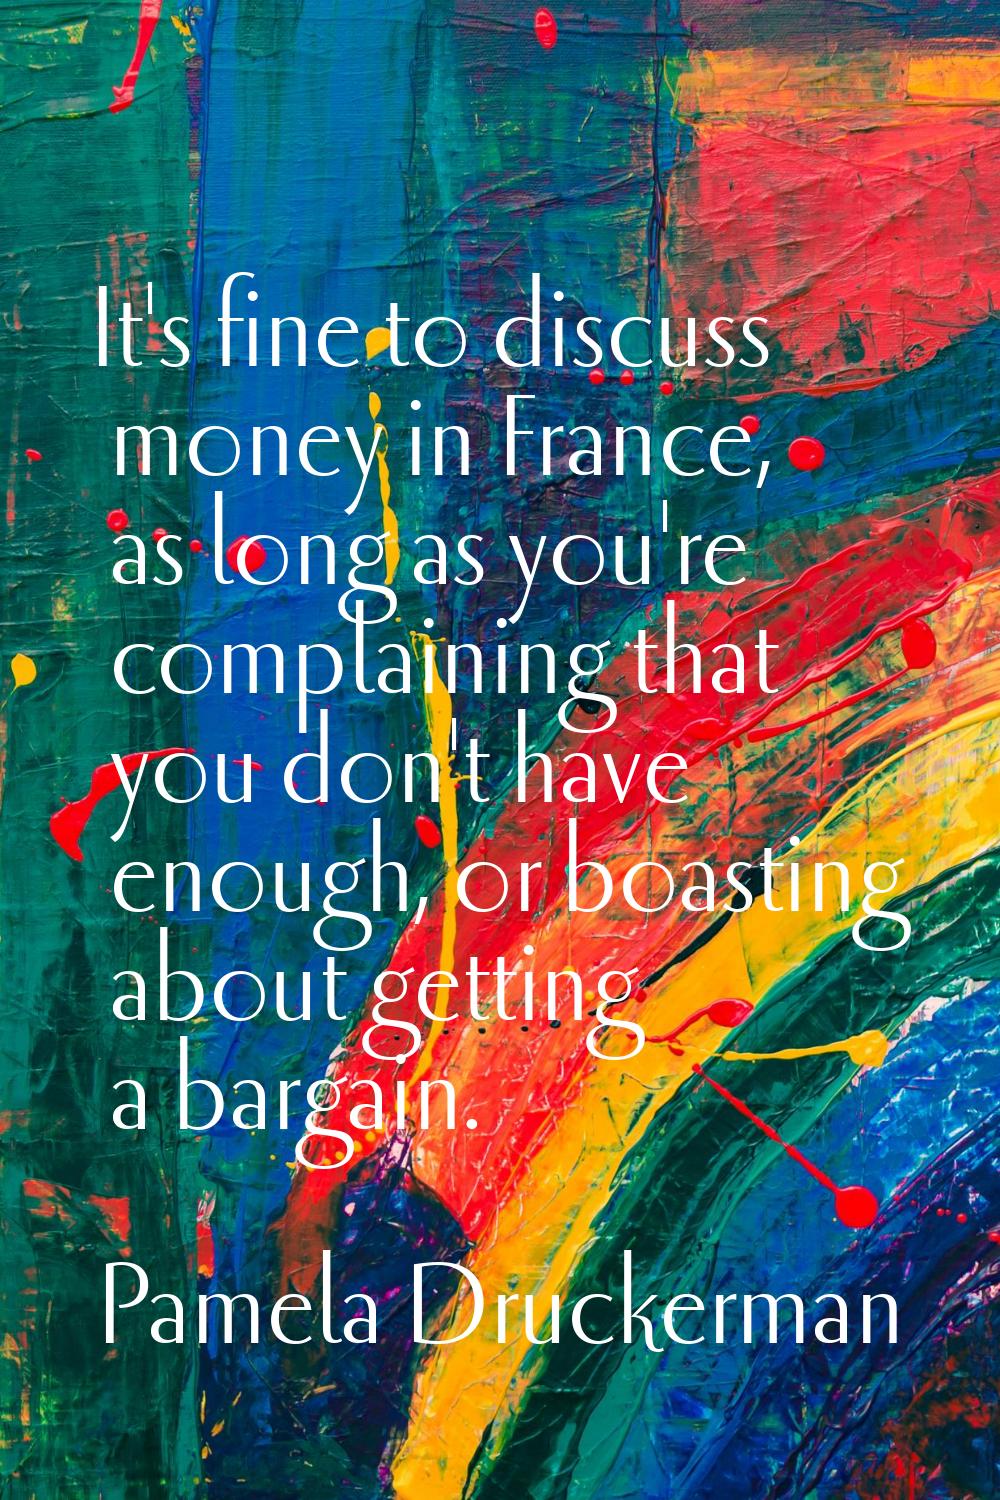 It's fine to discuss money in France, as long as you're complaining that you don't have enough, or 